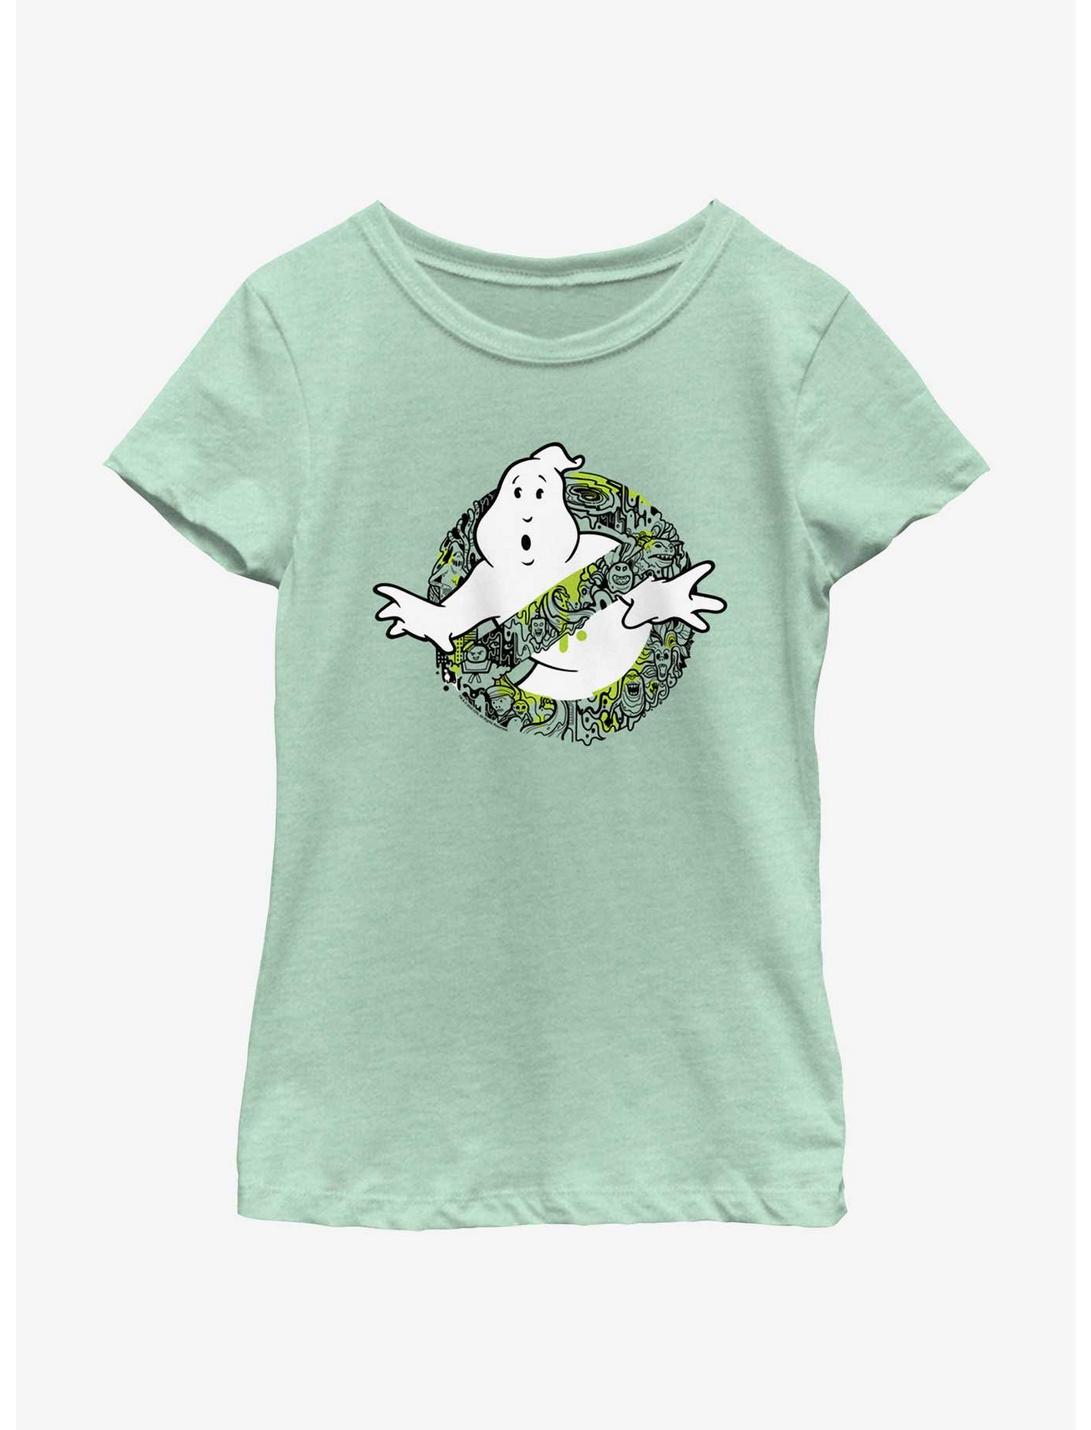 Ghostbusters: Frozen Empire Busting Ghosts Girls Youth T-Shirt, MINT, hi-res